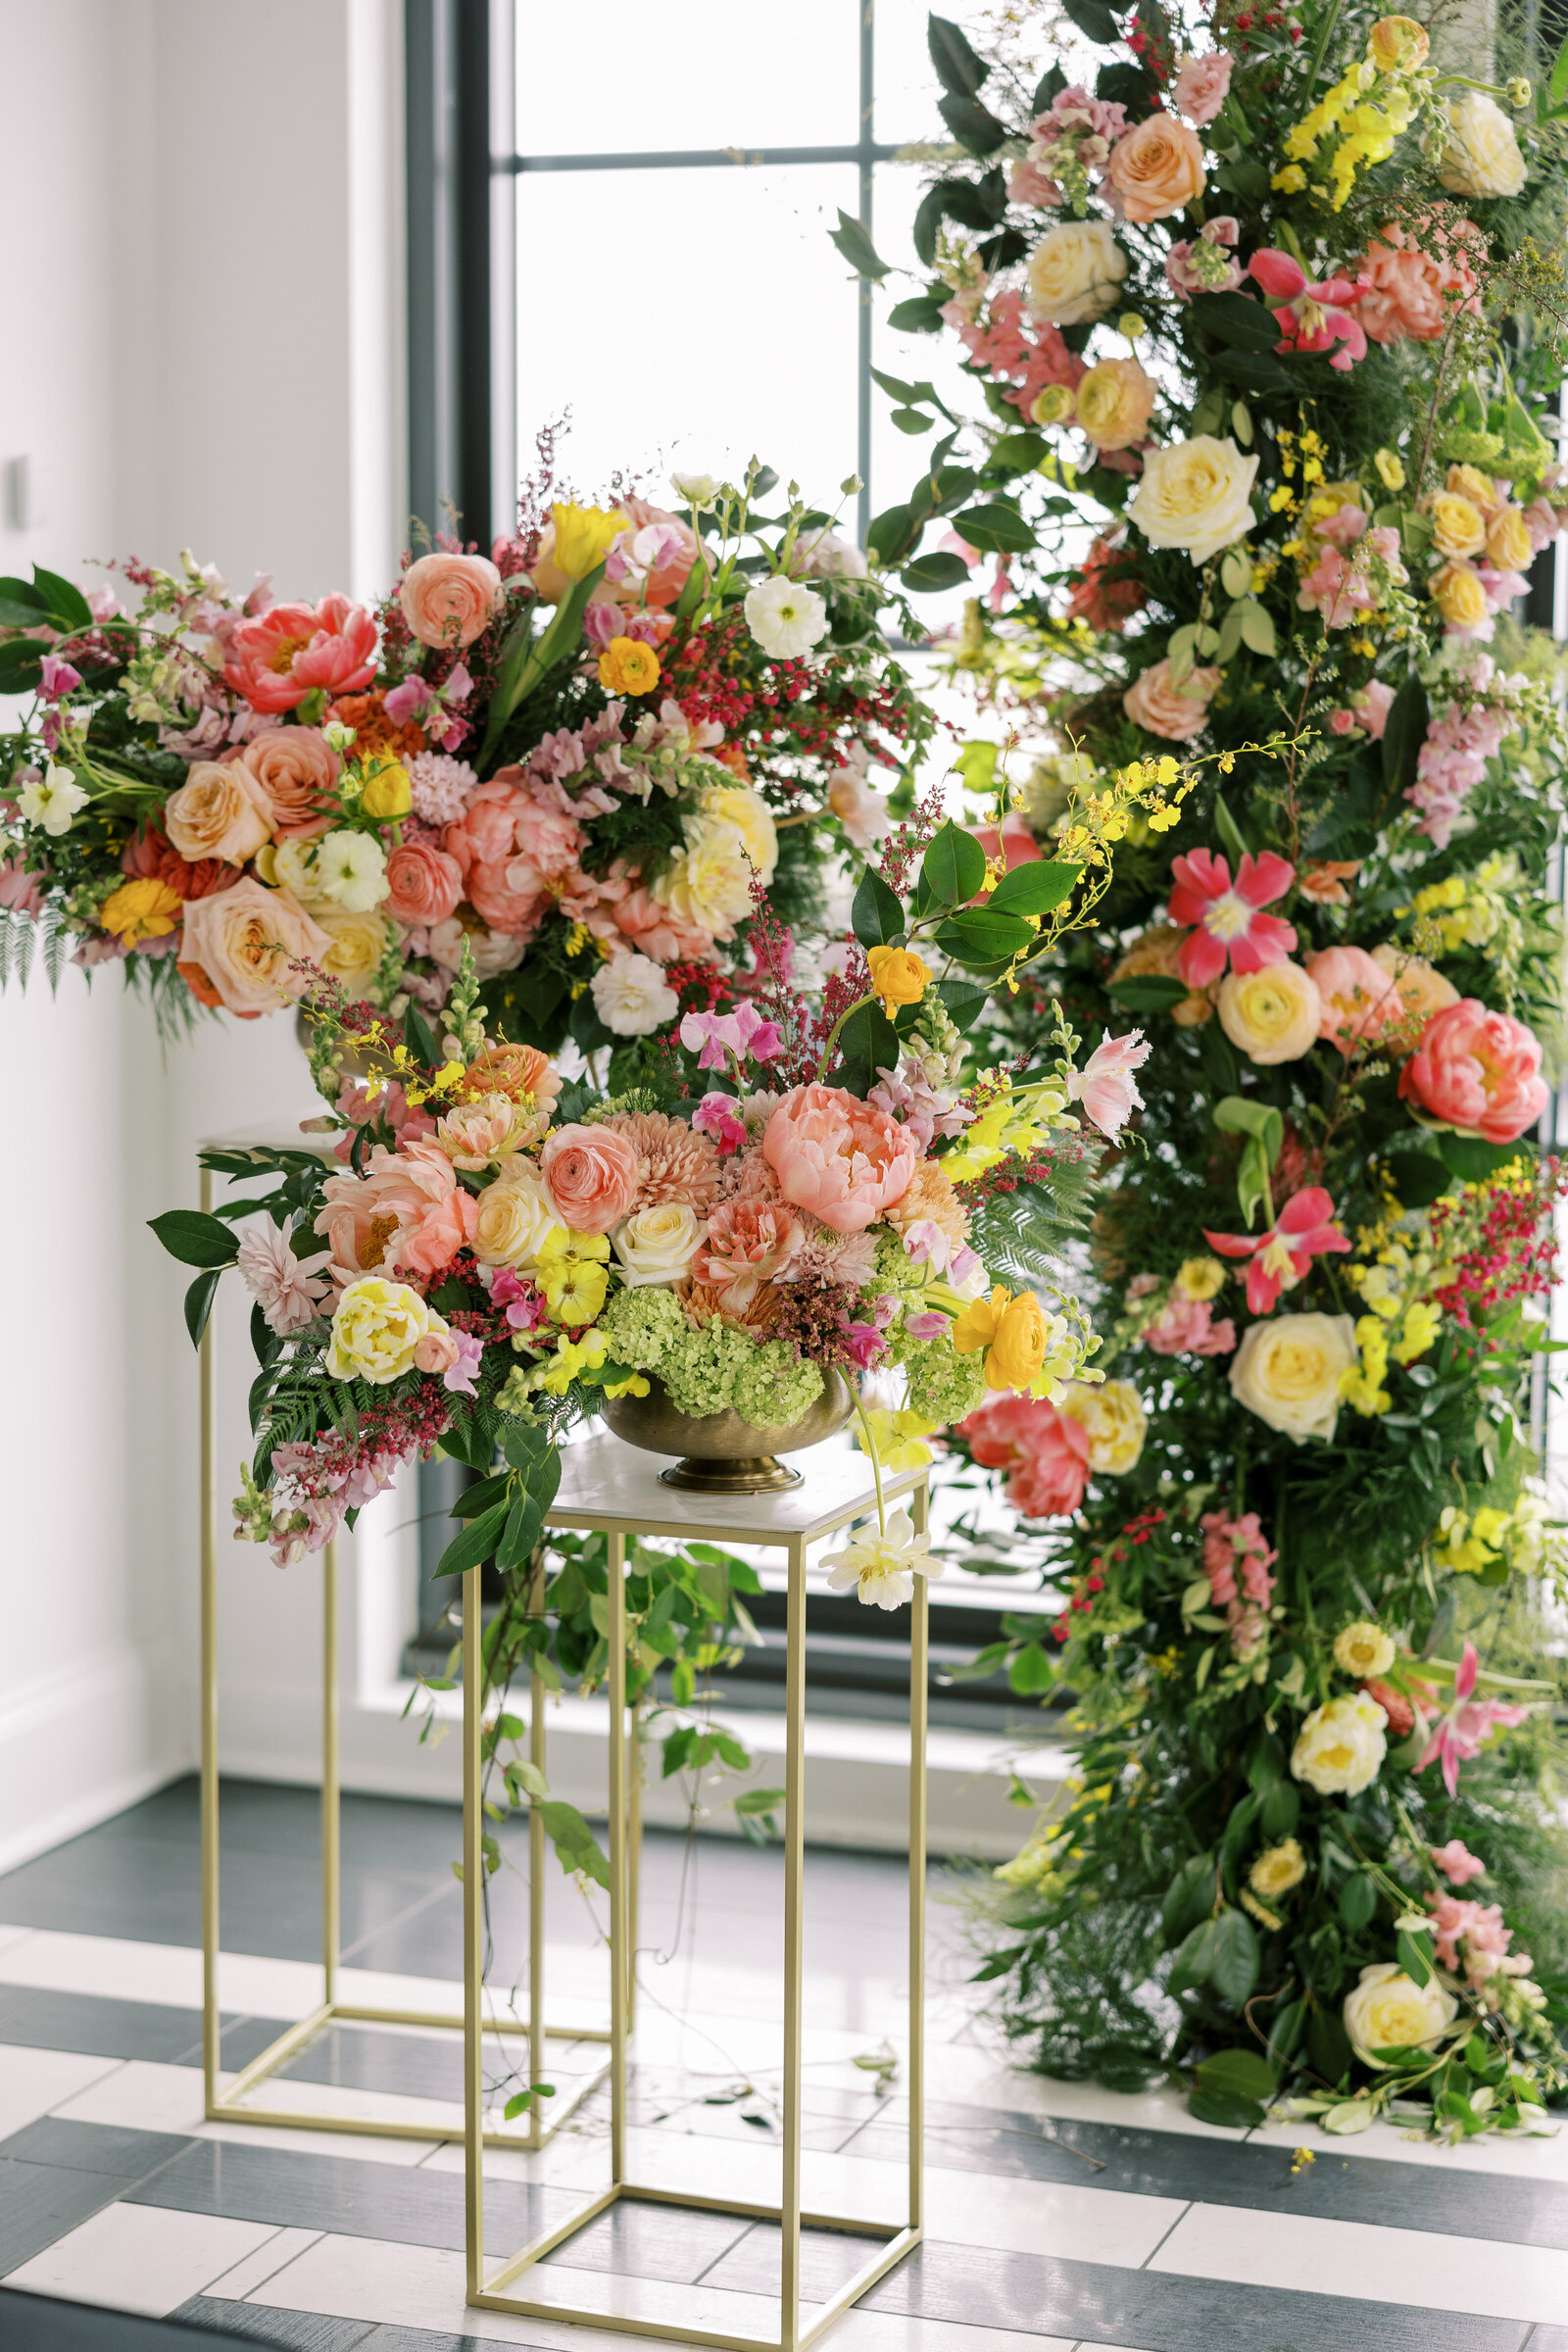 Wedding reception decor with colorful flower display